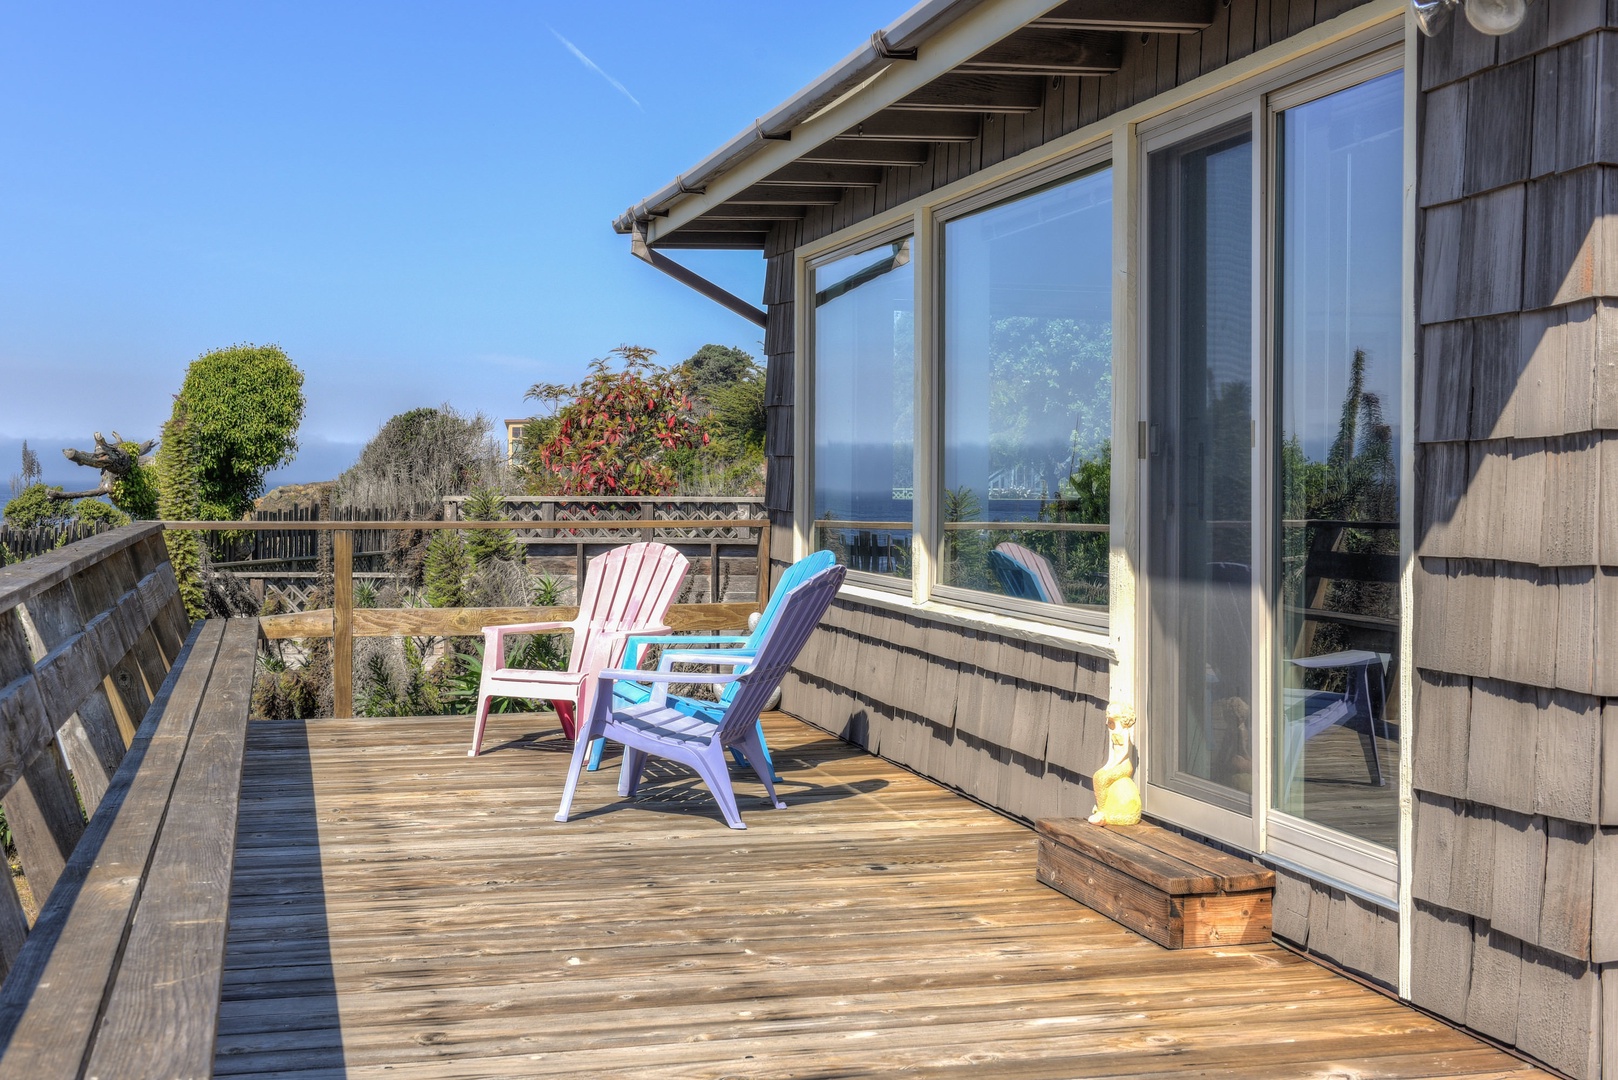 Private deck with ocean views, BBQ, and patio seating